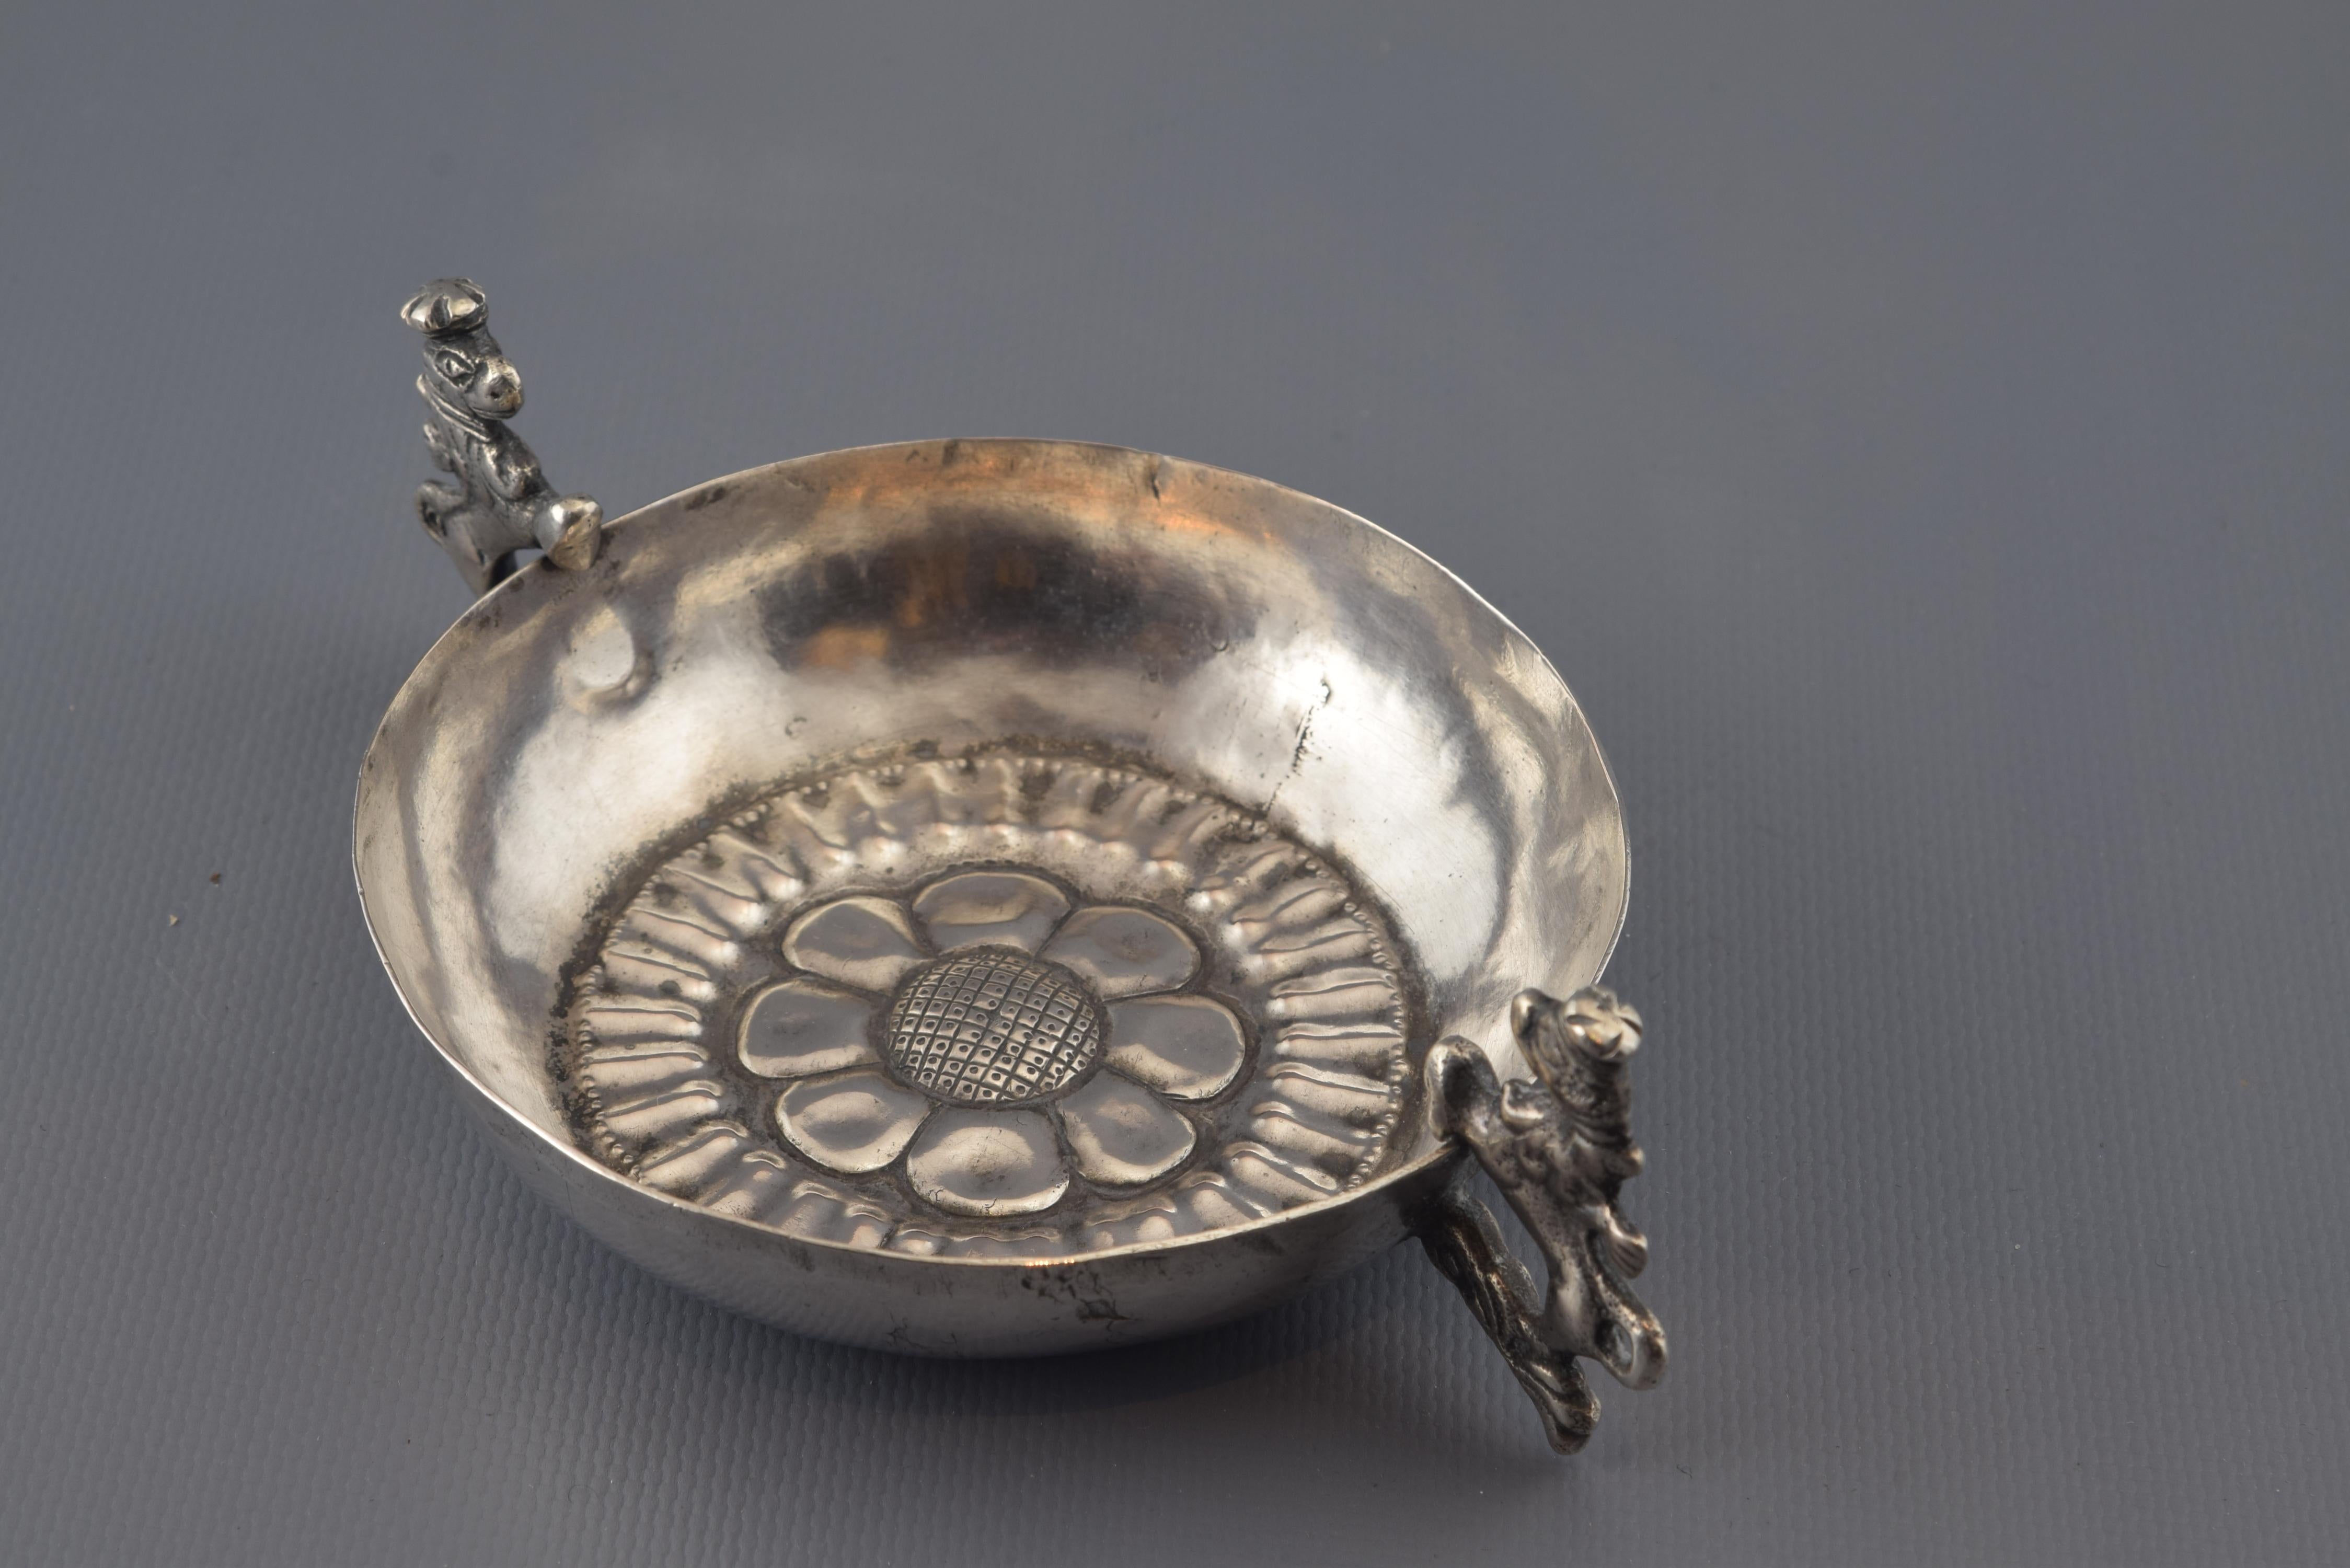 Without hallmarks.
Silver drinking cup with smooth edges, handles in the shape of a crowned animal (rampant lions with curved tail towards the back) and a decoration at the bottom of the piece of lines framing a simple flower. In the Spanish